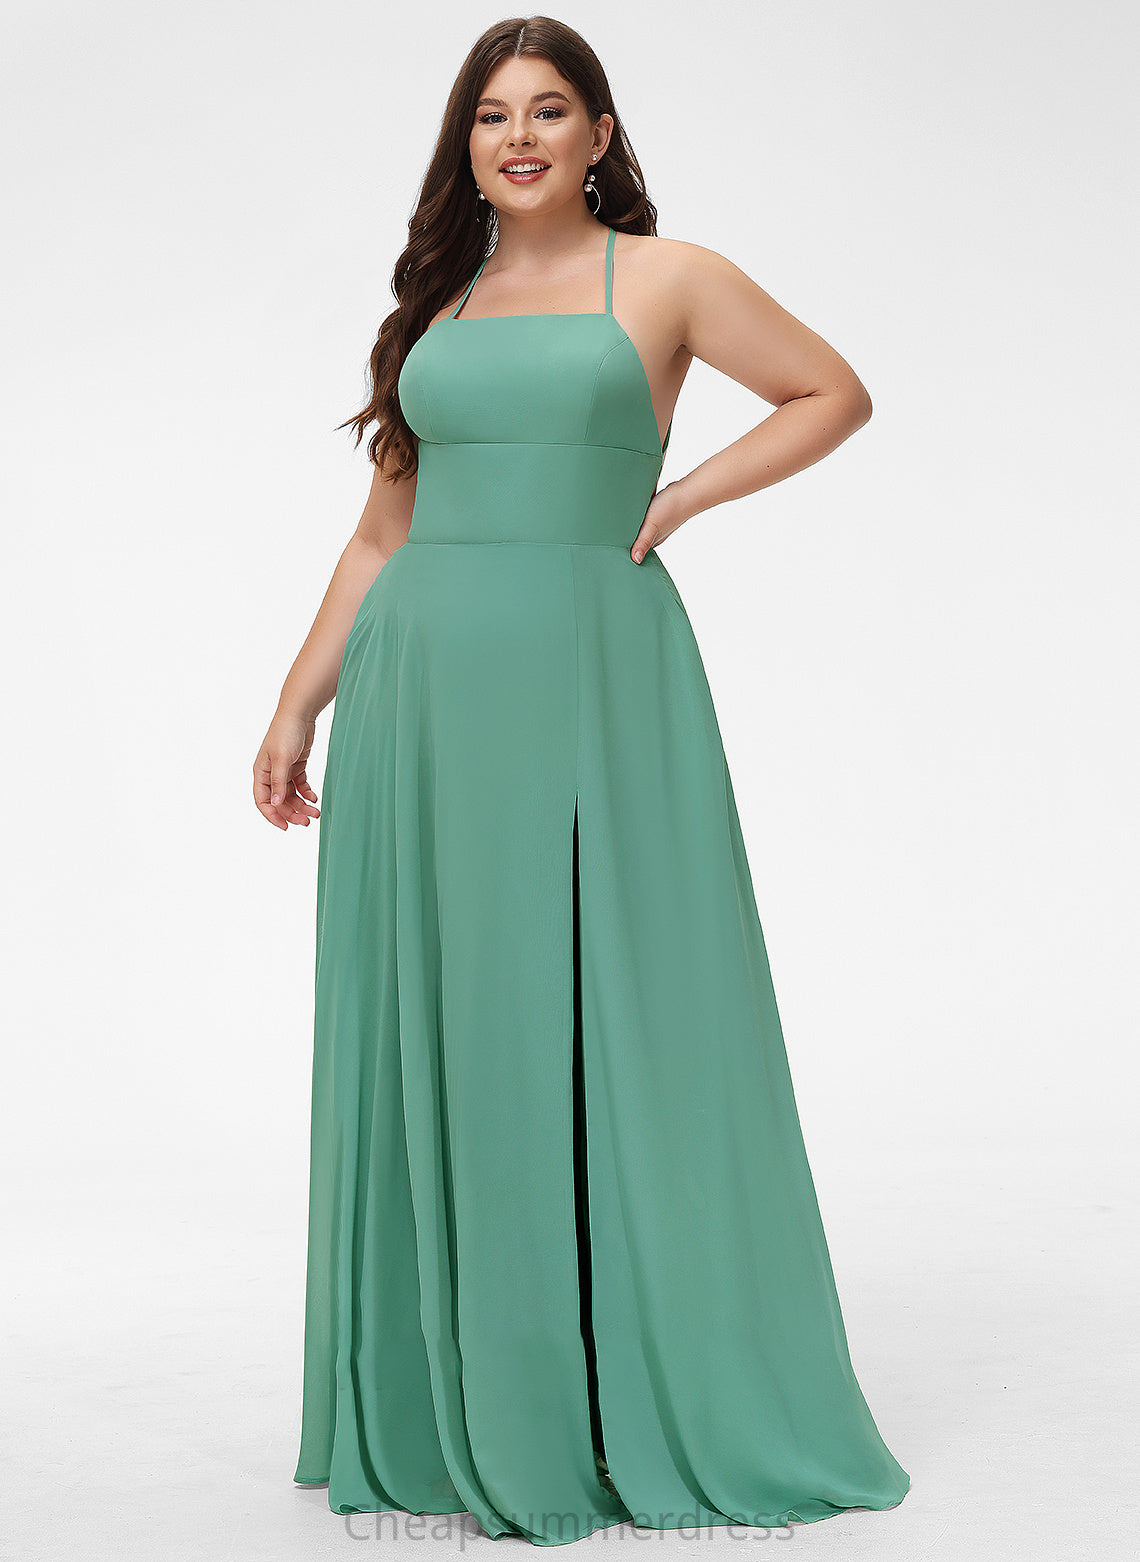 Floor-Length Front Square Split Pockets Prom Dresses A-Line Liberty With Chiffon Neckline